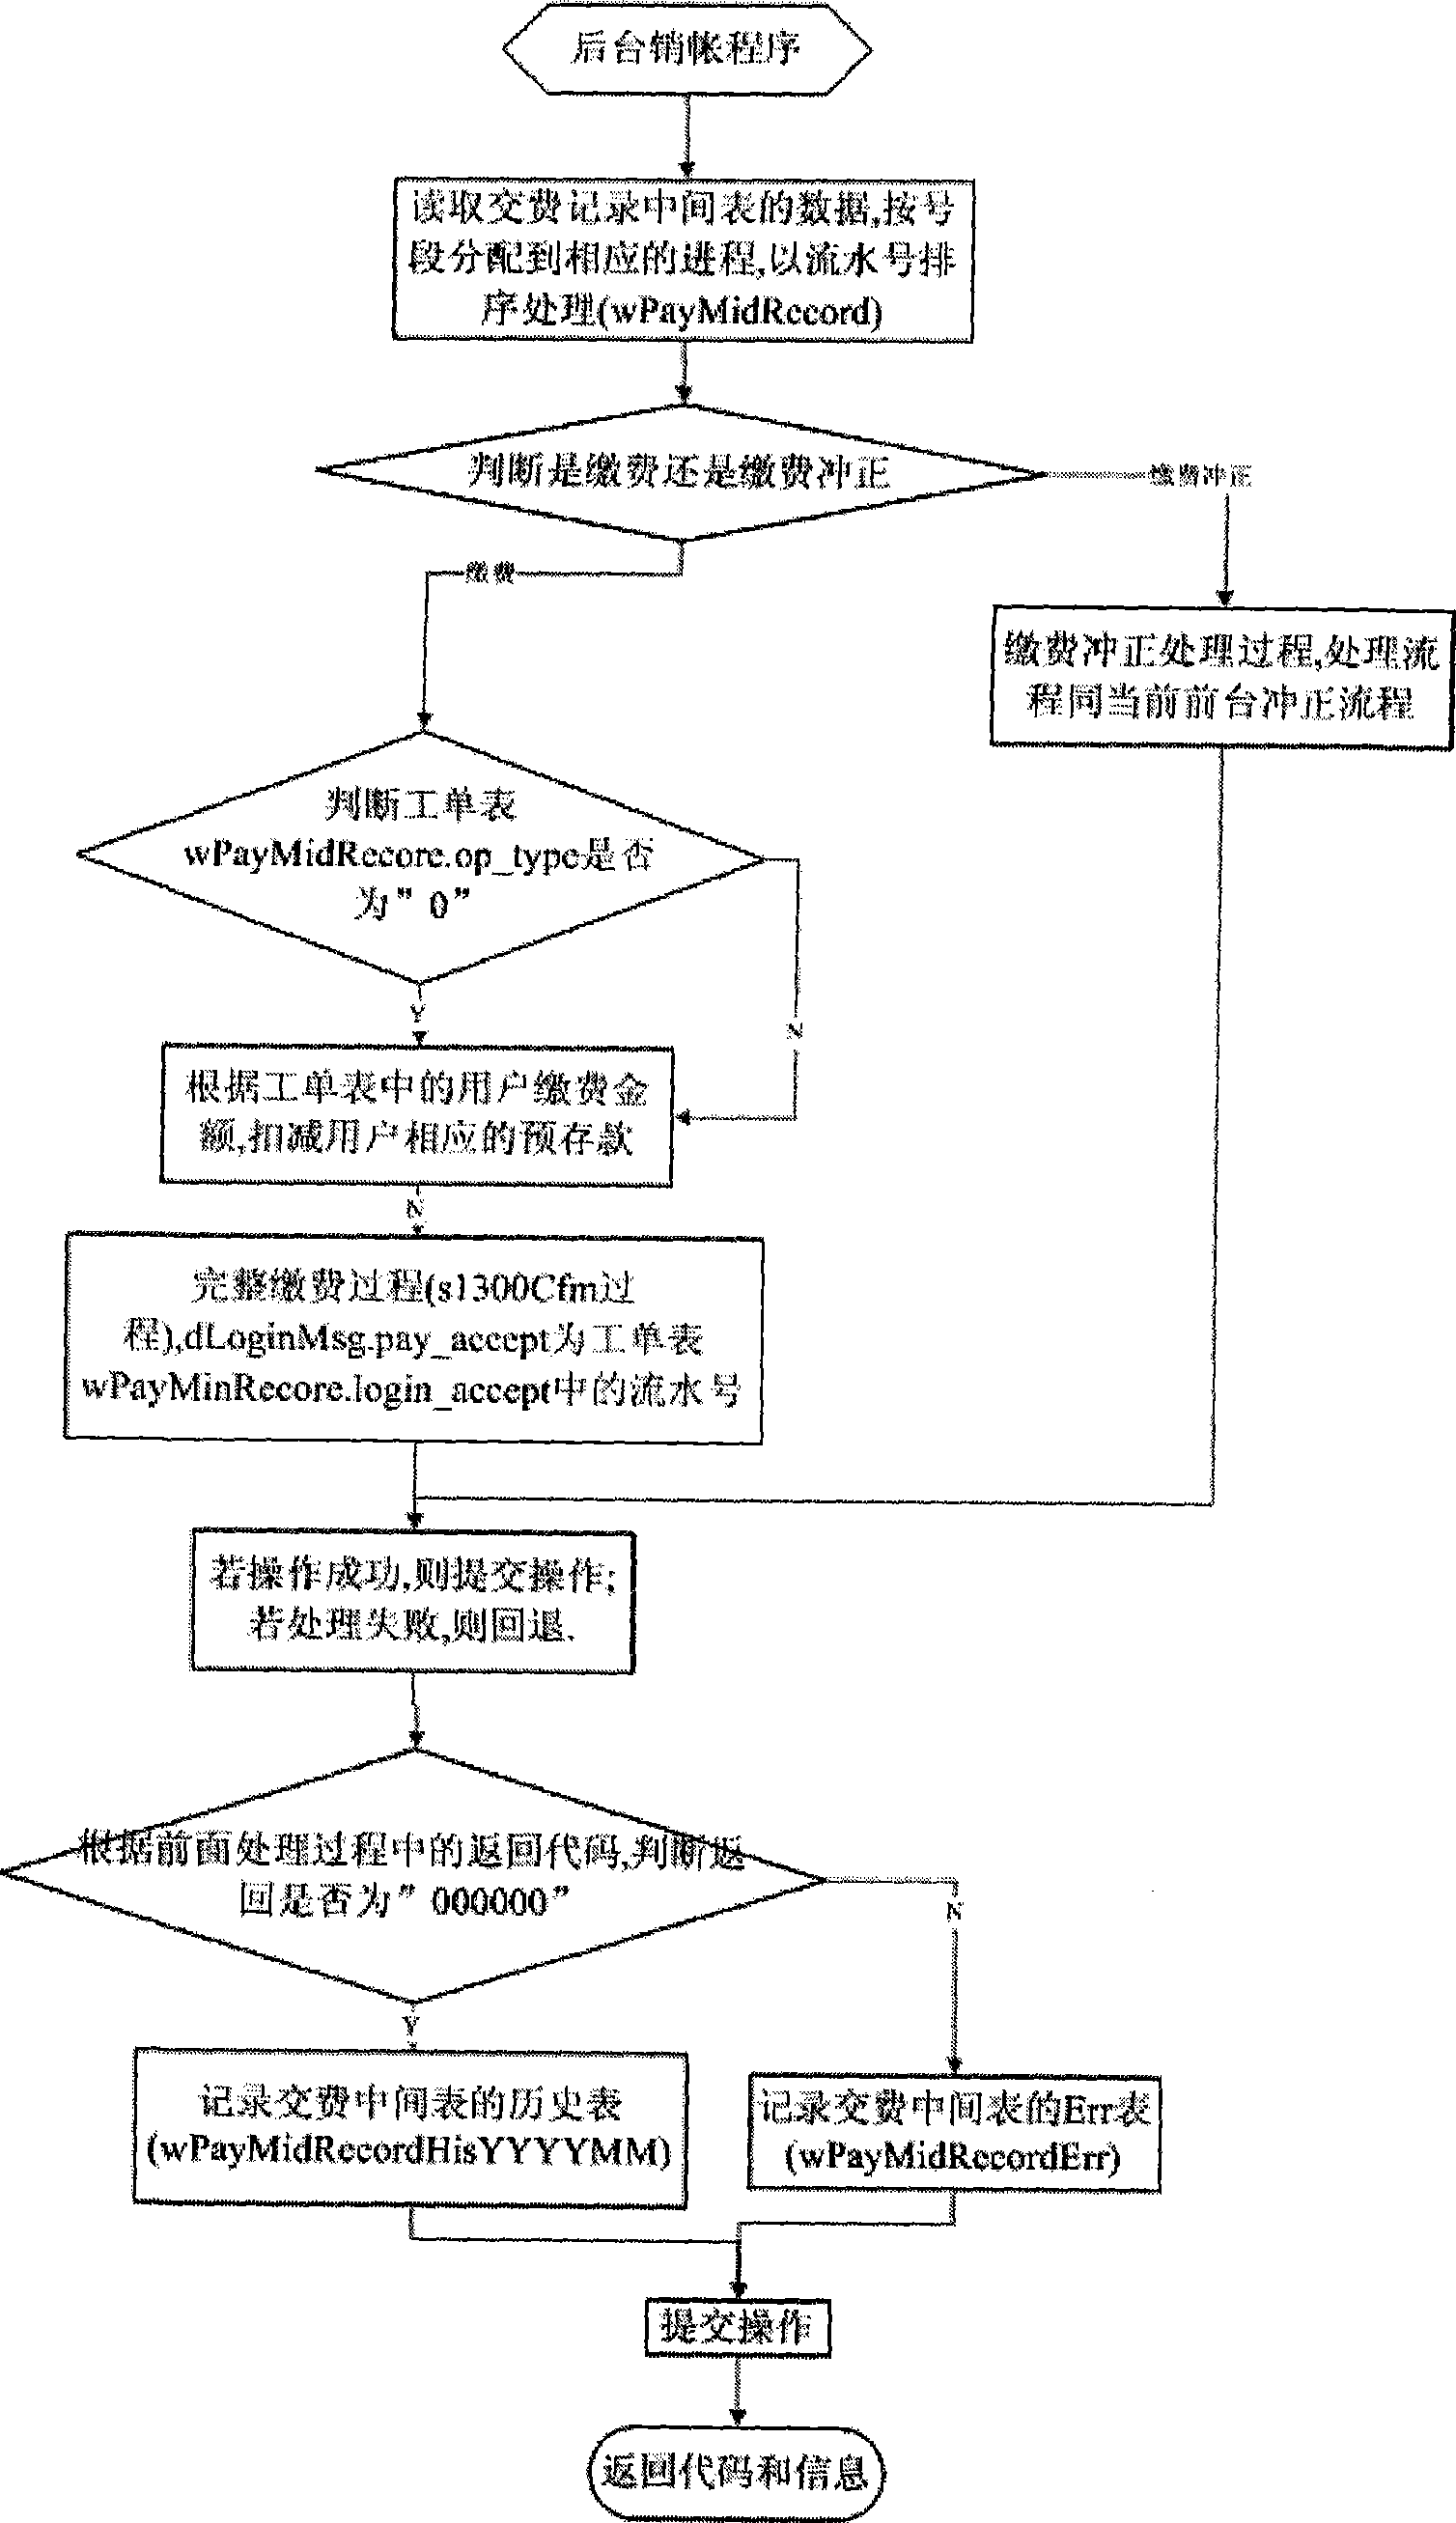 Method for asynchronous payment arrival of mobile phone account